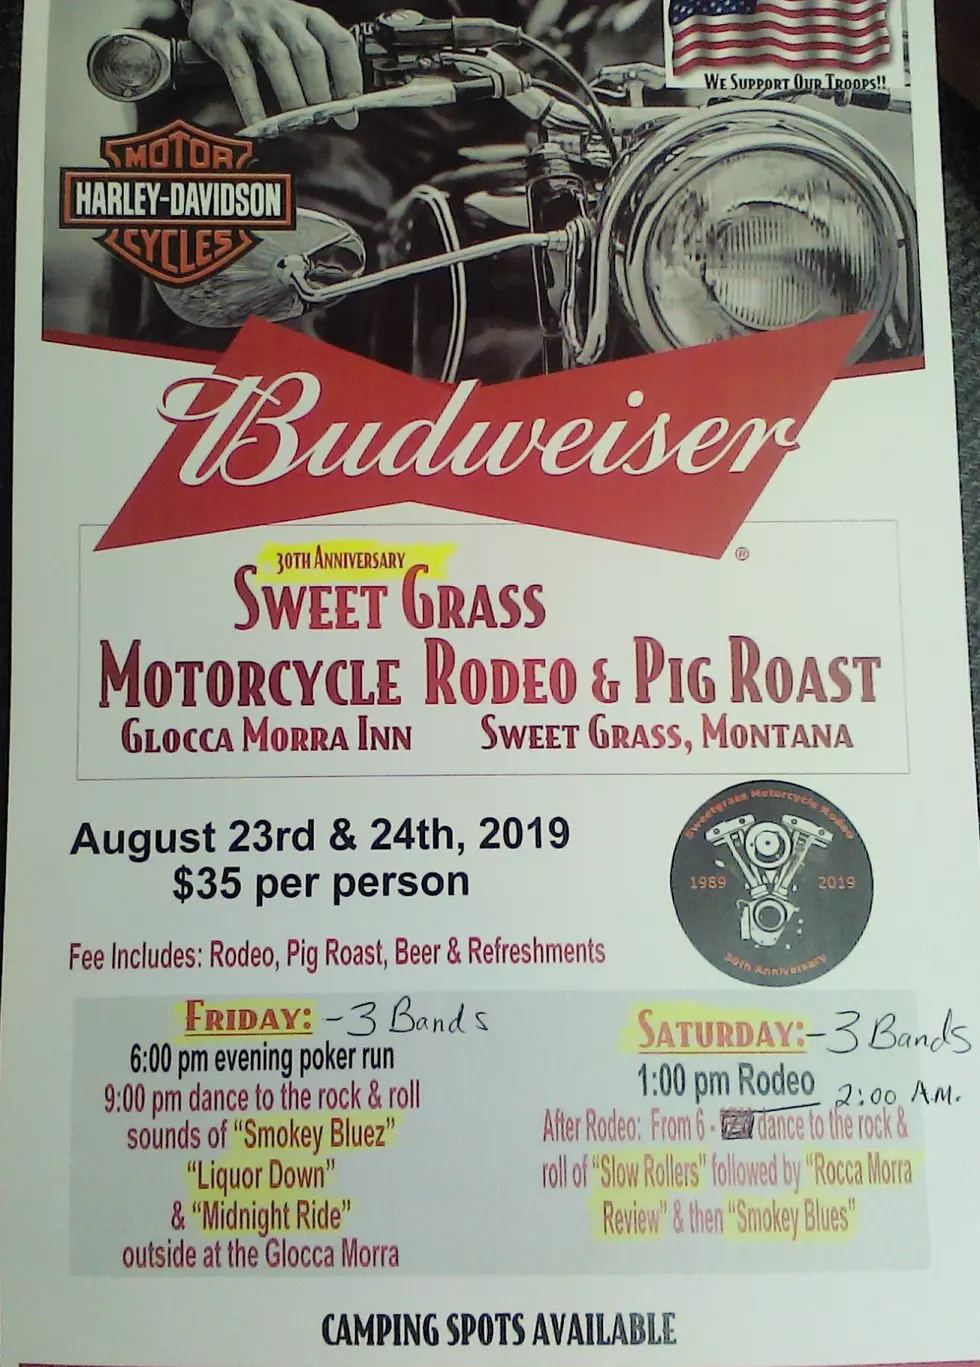 Sweet Grass Motorcycle Rodeo